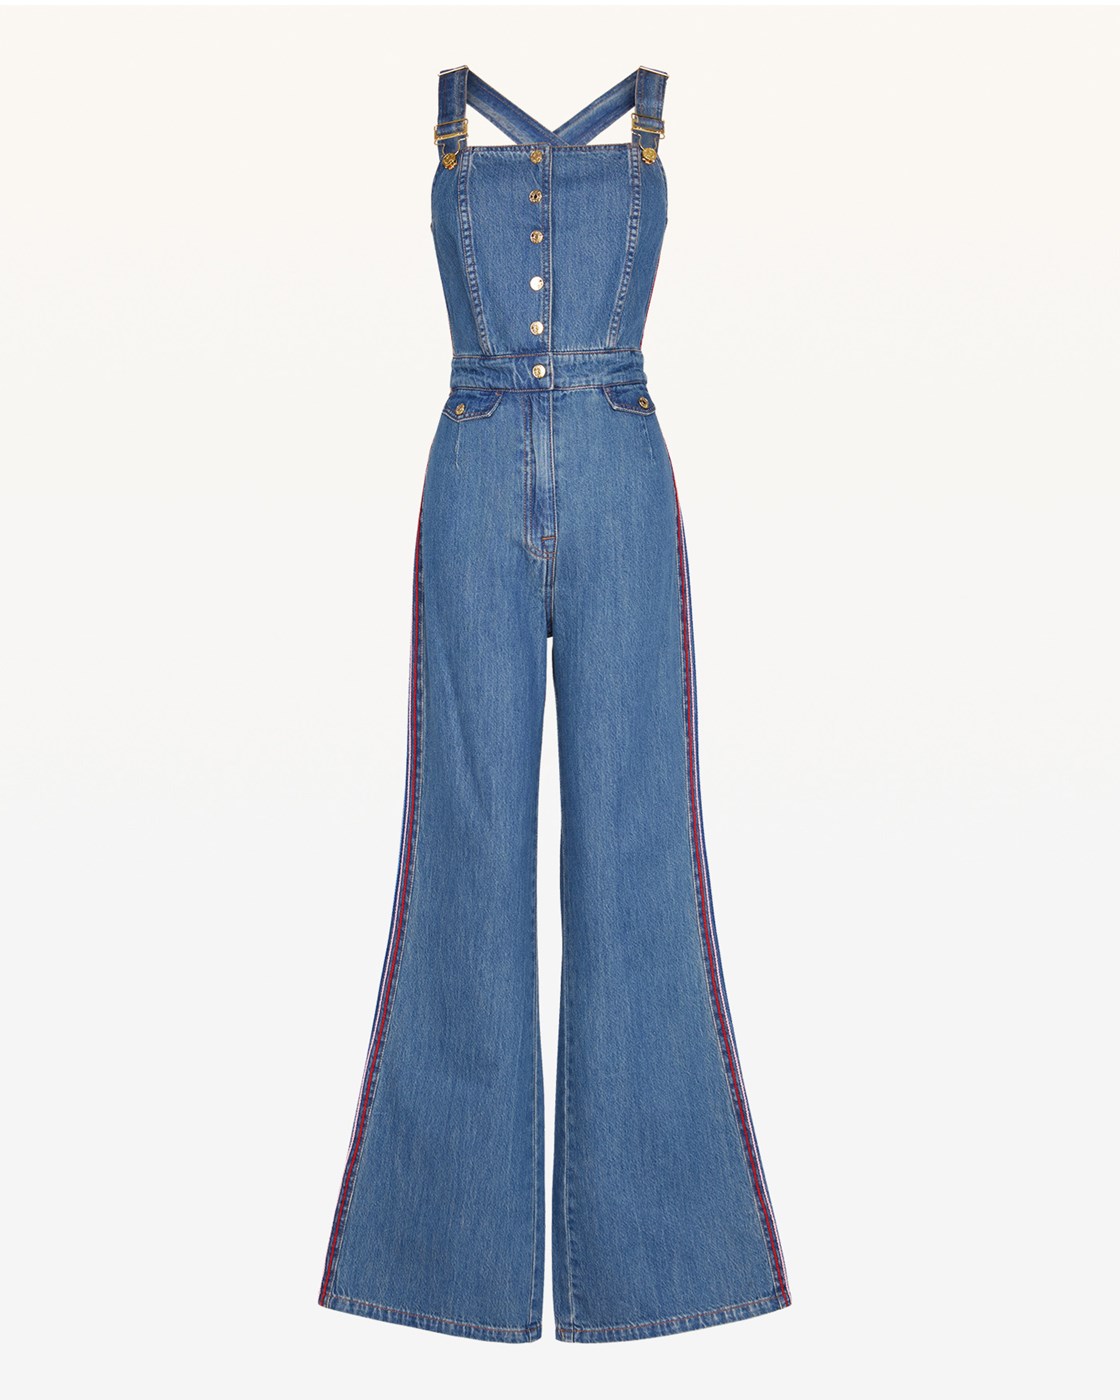 Juicy Couture Multicolor Embroidered Denim Overall